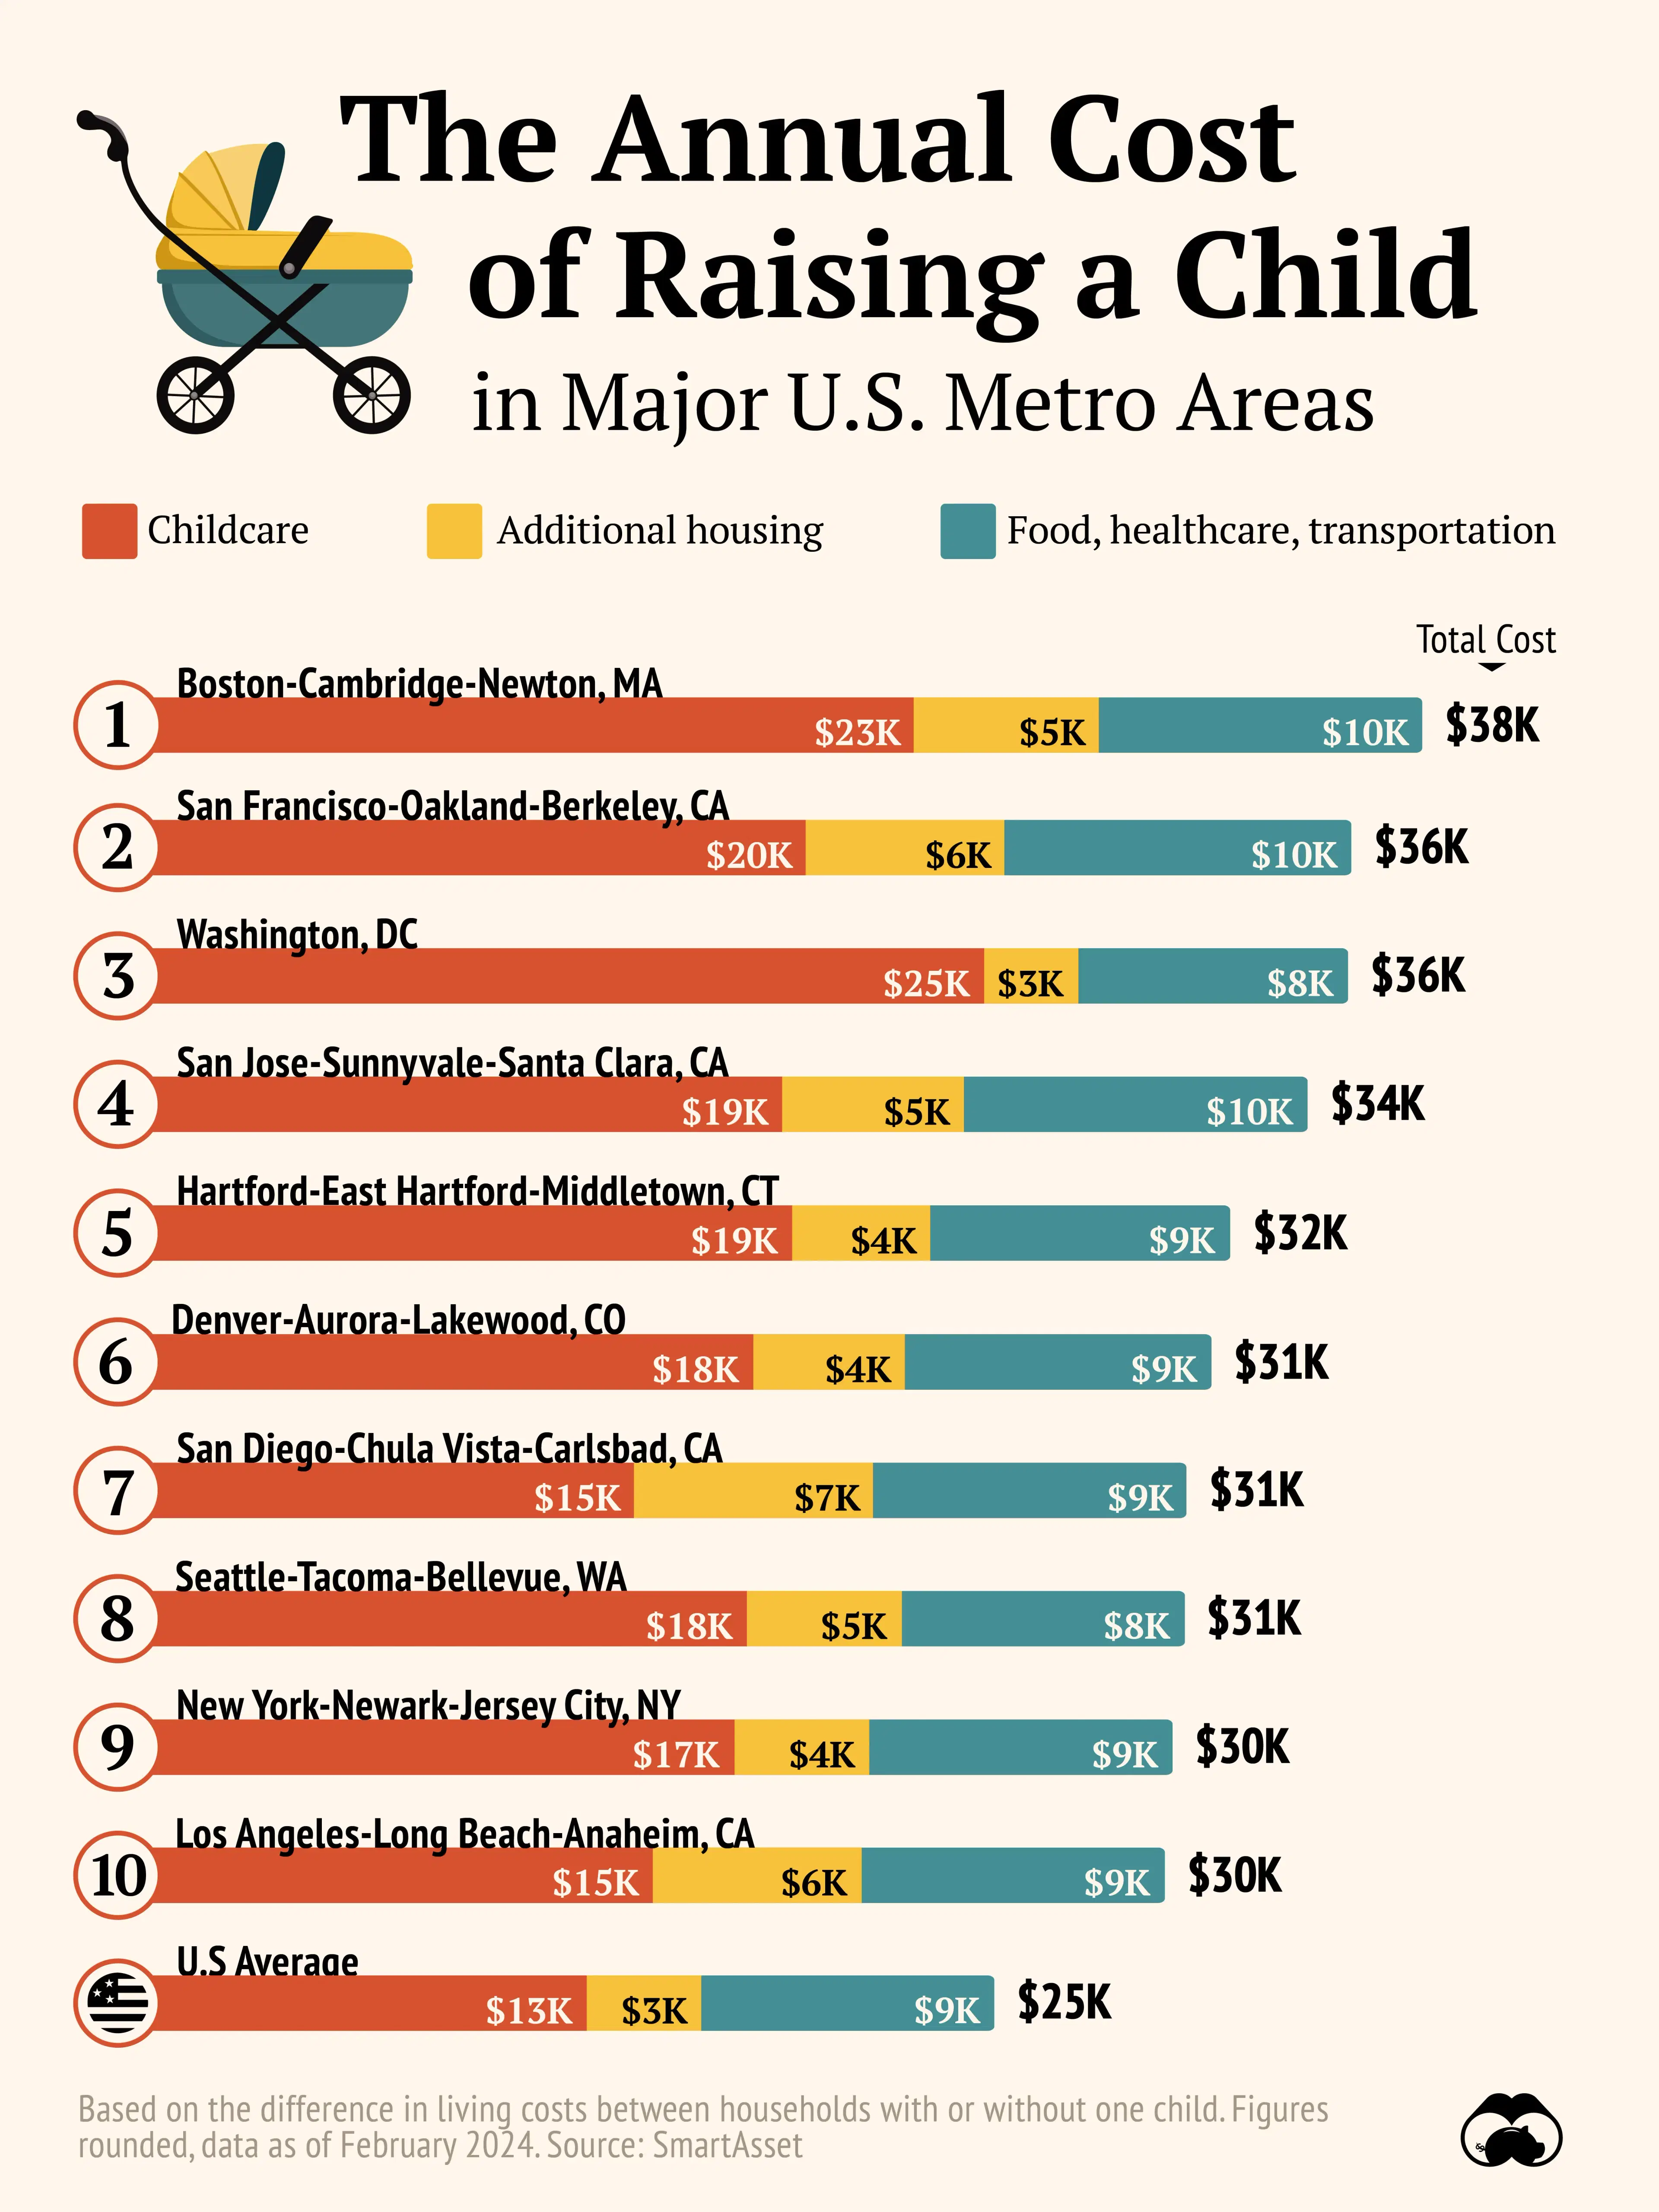 Boston is the Most Expensive Place to Raise a Child in the U.S.